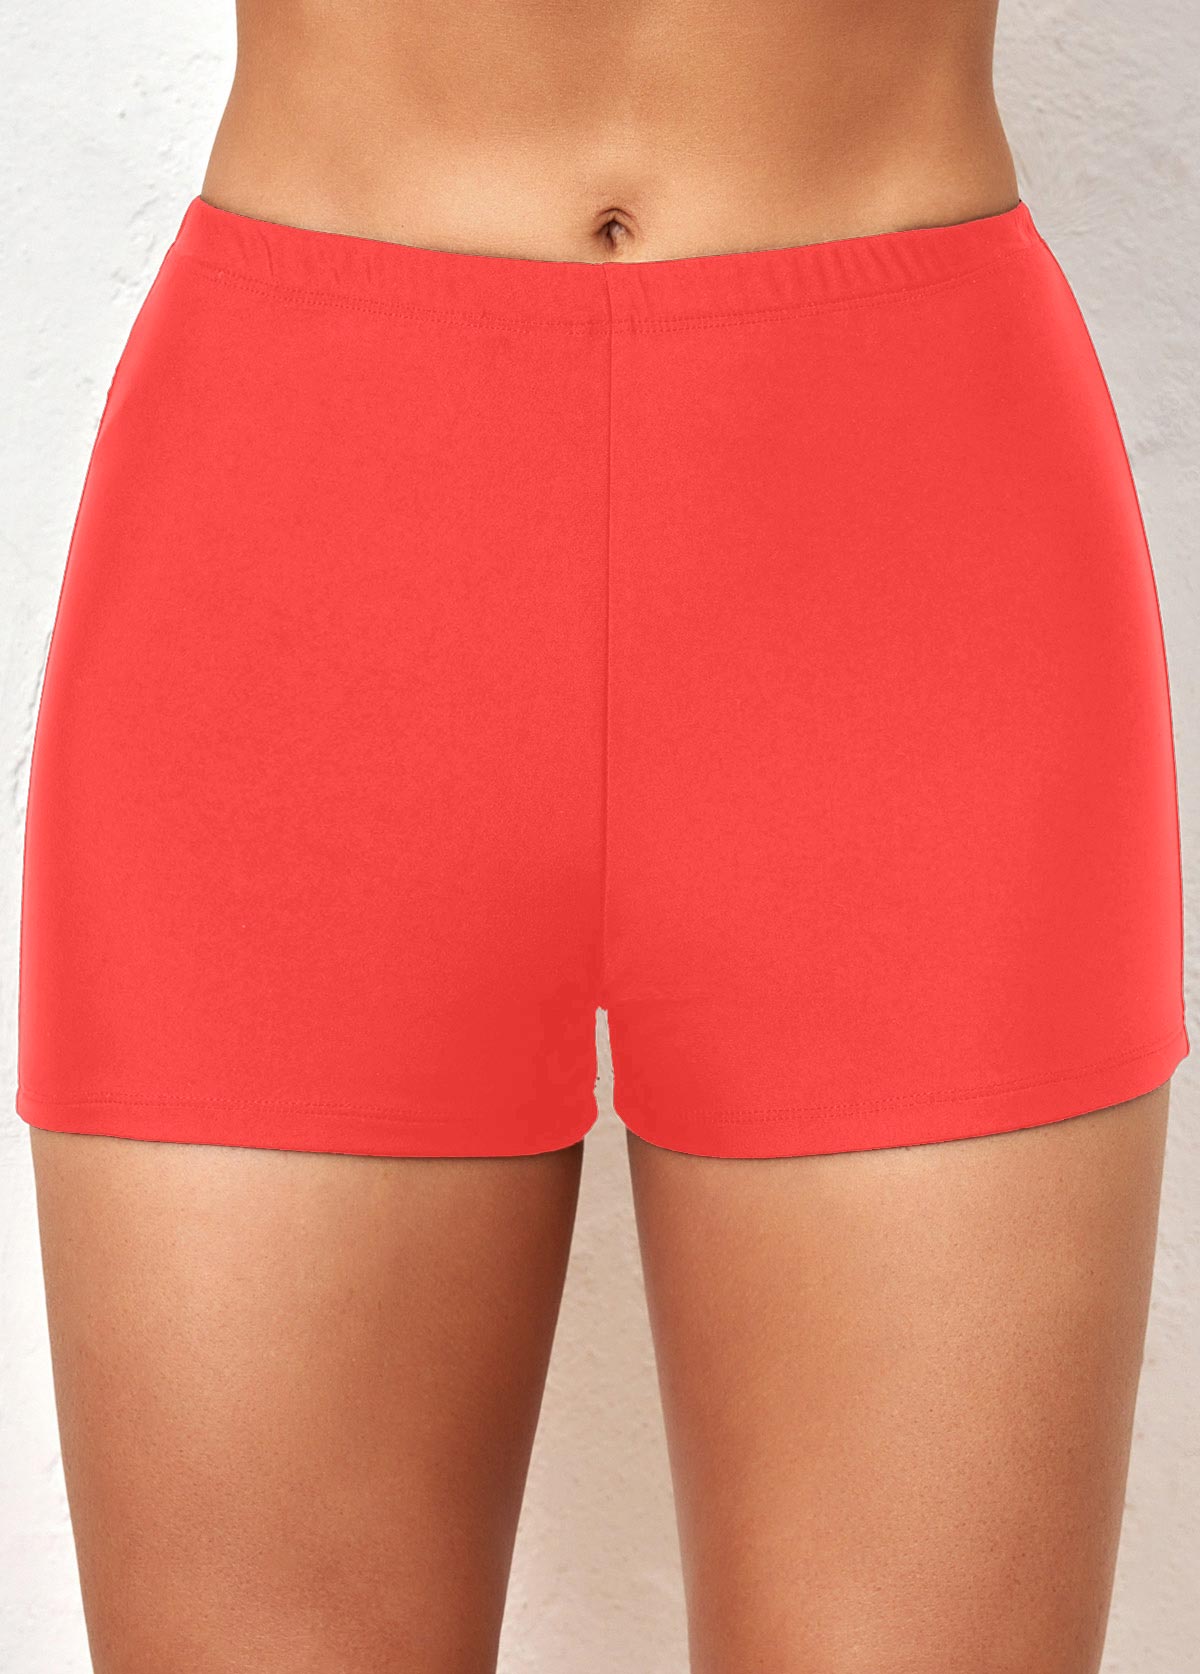 Mid Waisted Coral Red Stretchy Swim Shorts